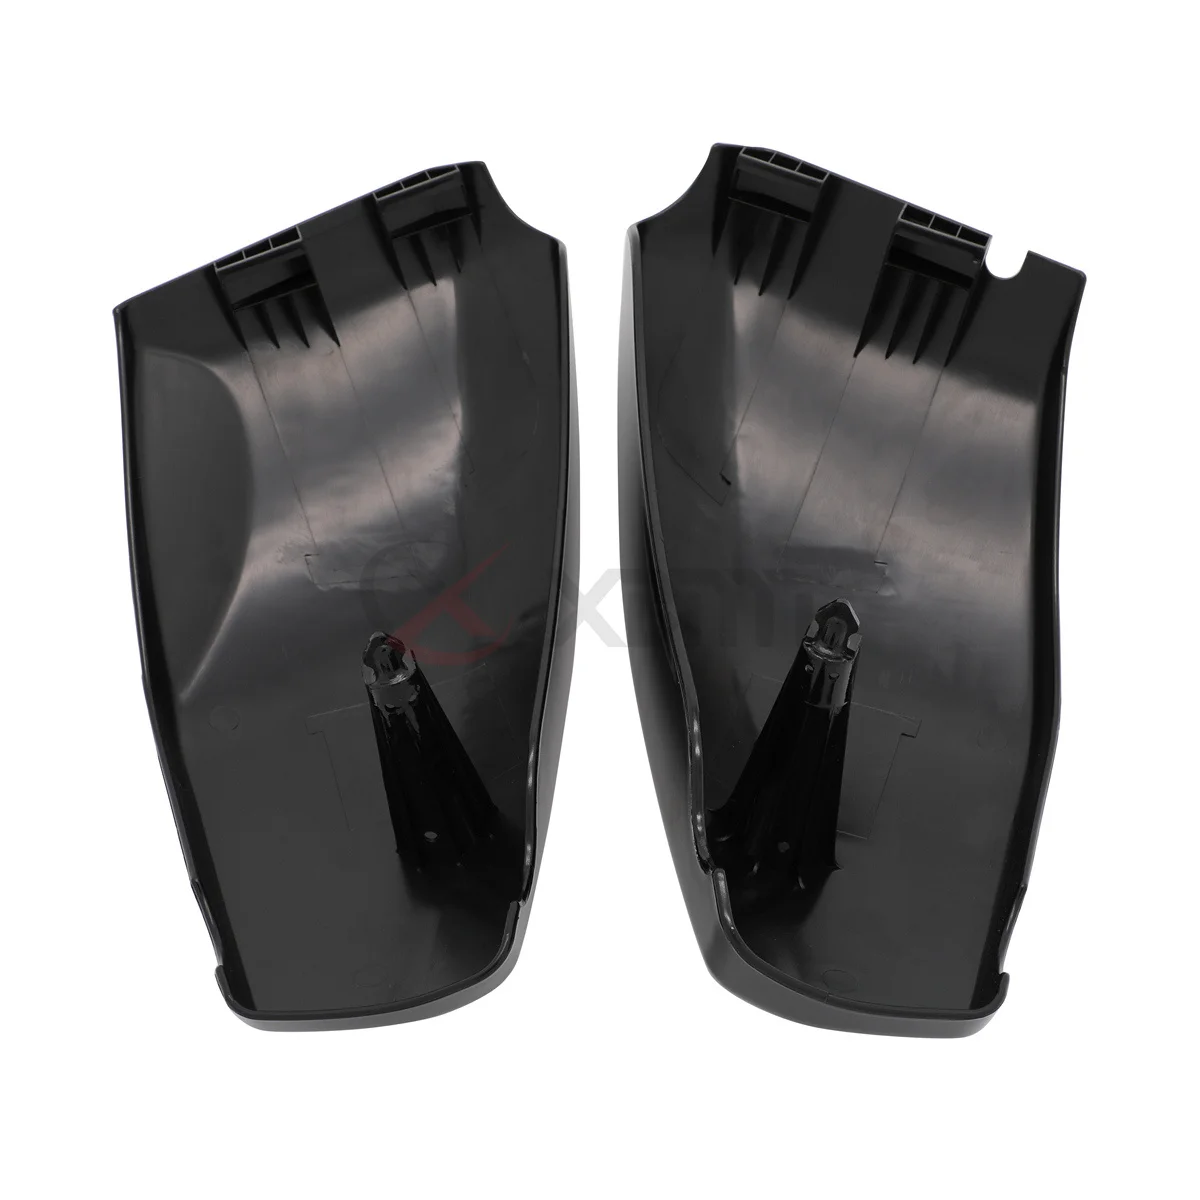 Motorcycle ABS Plastic Side Fairing Battery Cover For Honda VTX 1300 VTX1300 VTX1300C VTX1300R VTX1300S VTX1300T 2003-2009 | Автомобили и - Фото №1